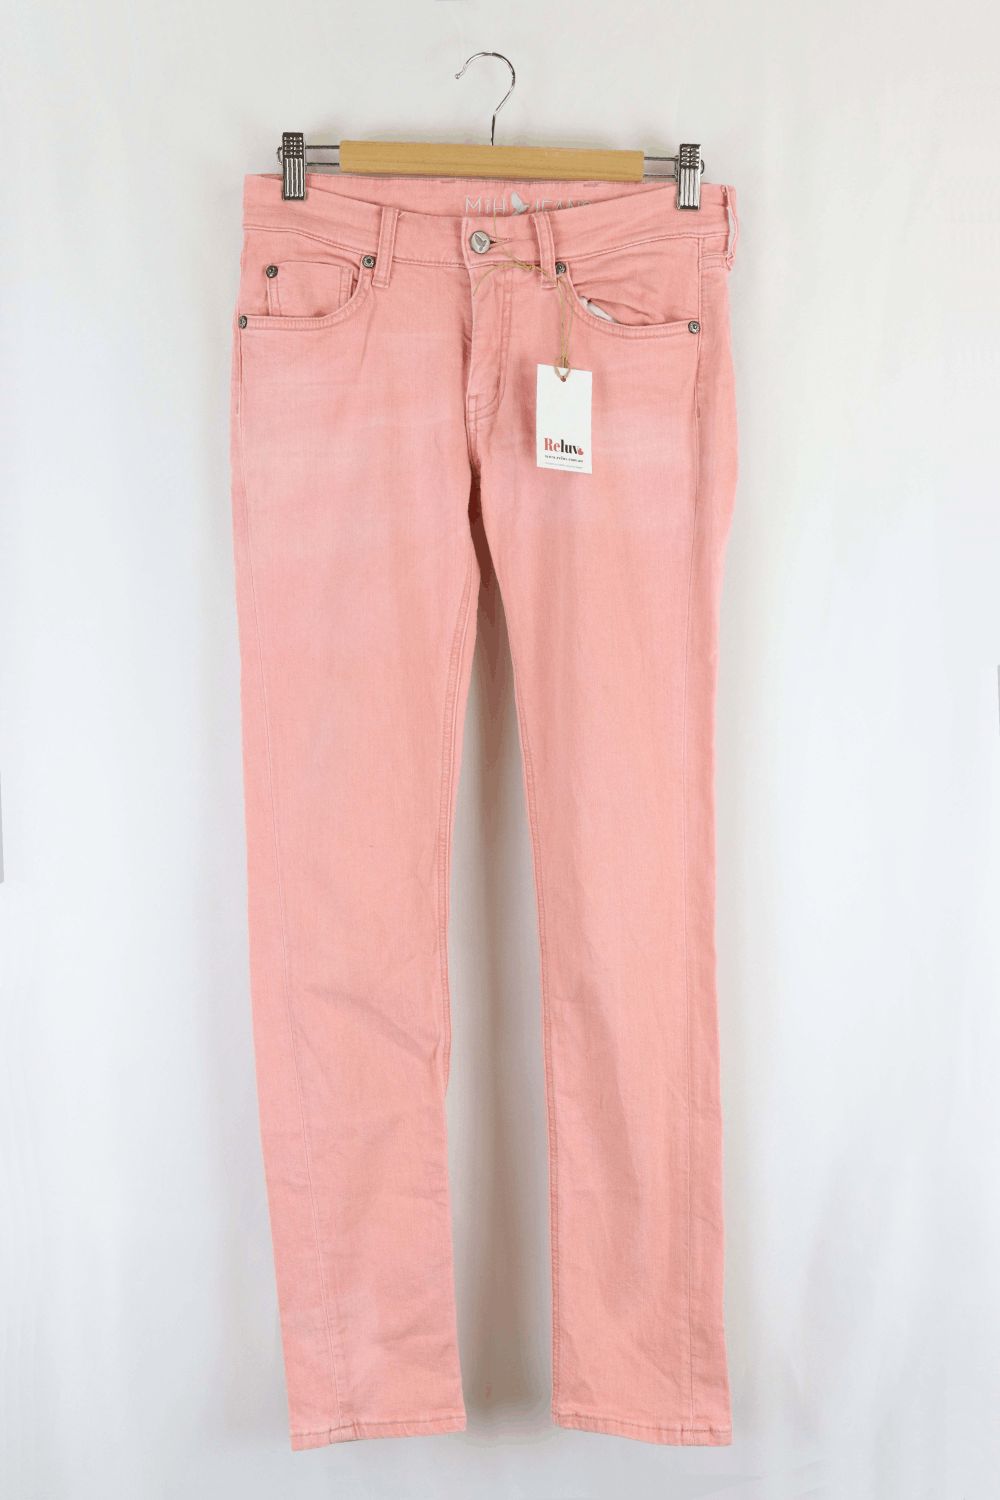 MIH Jeans Pink 28 (8)